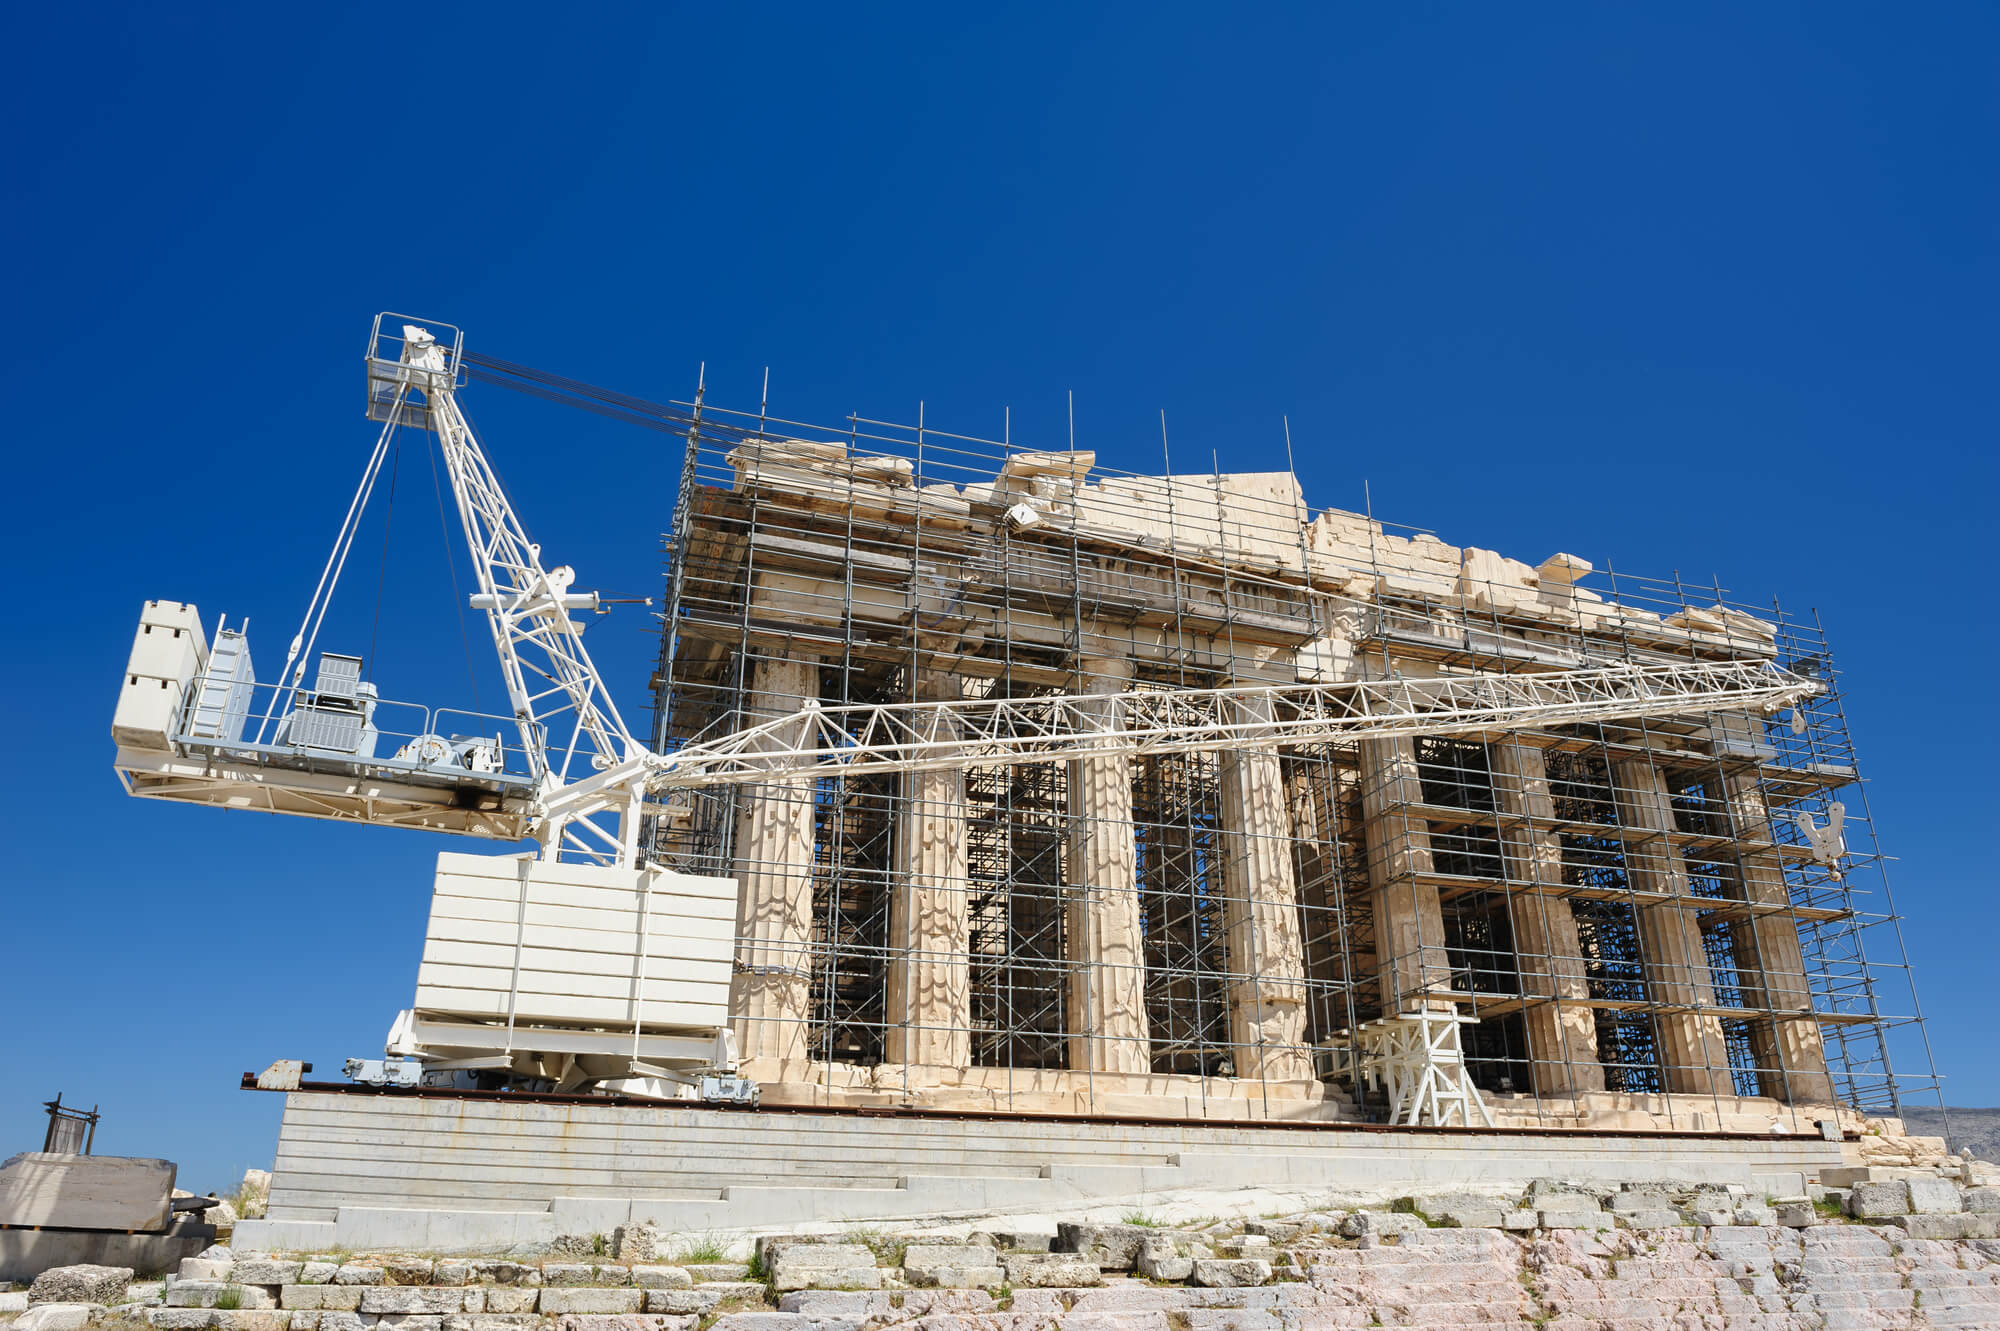 Acropolis of Athens covered in scaffolding